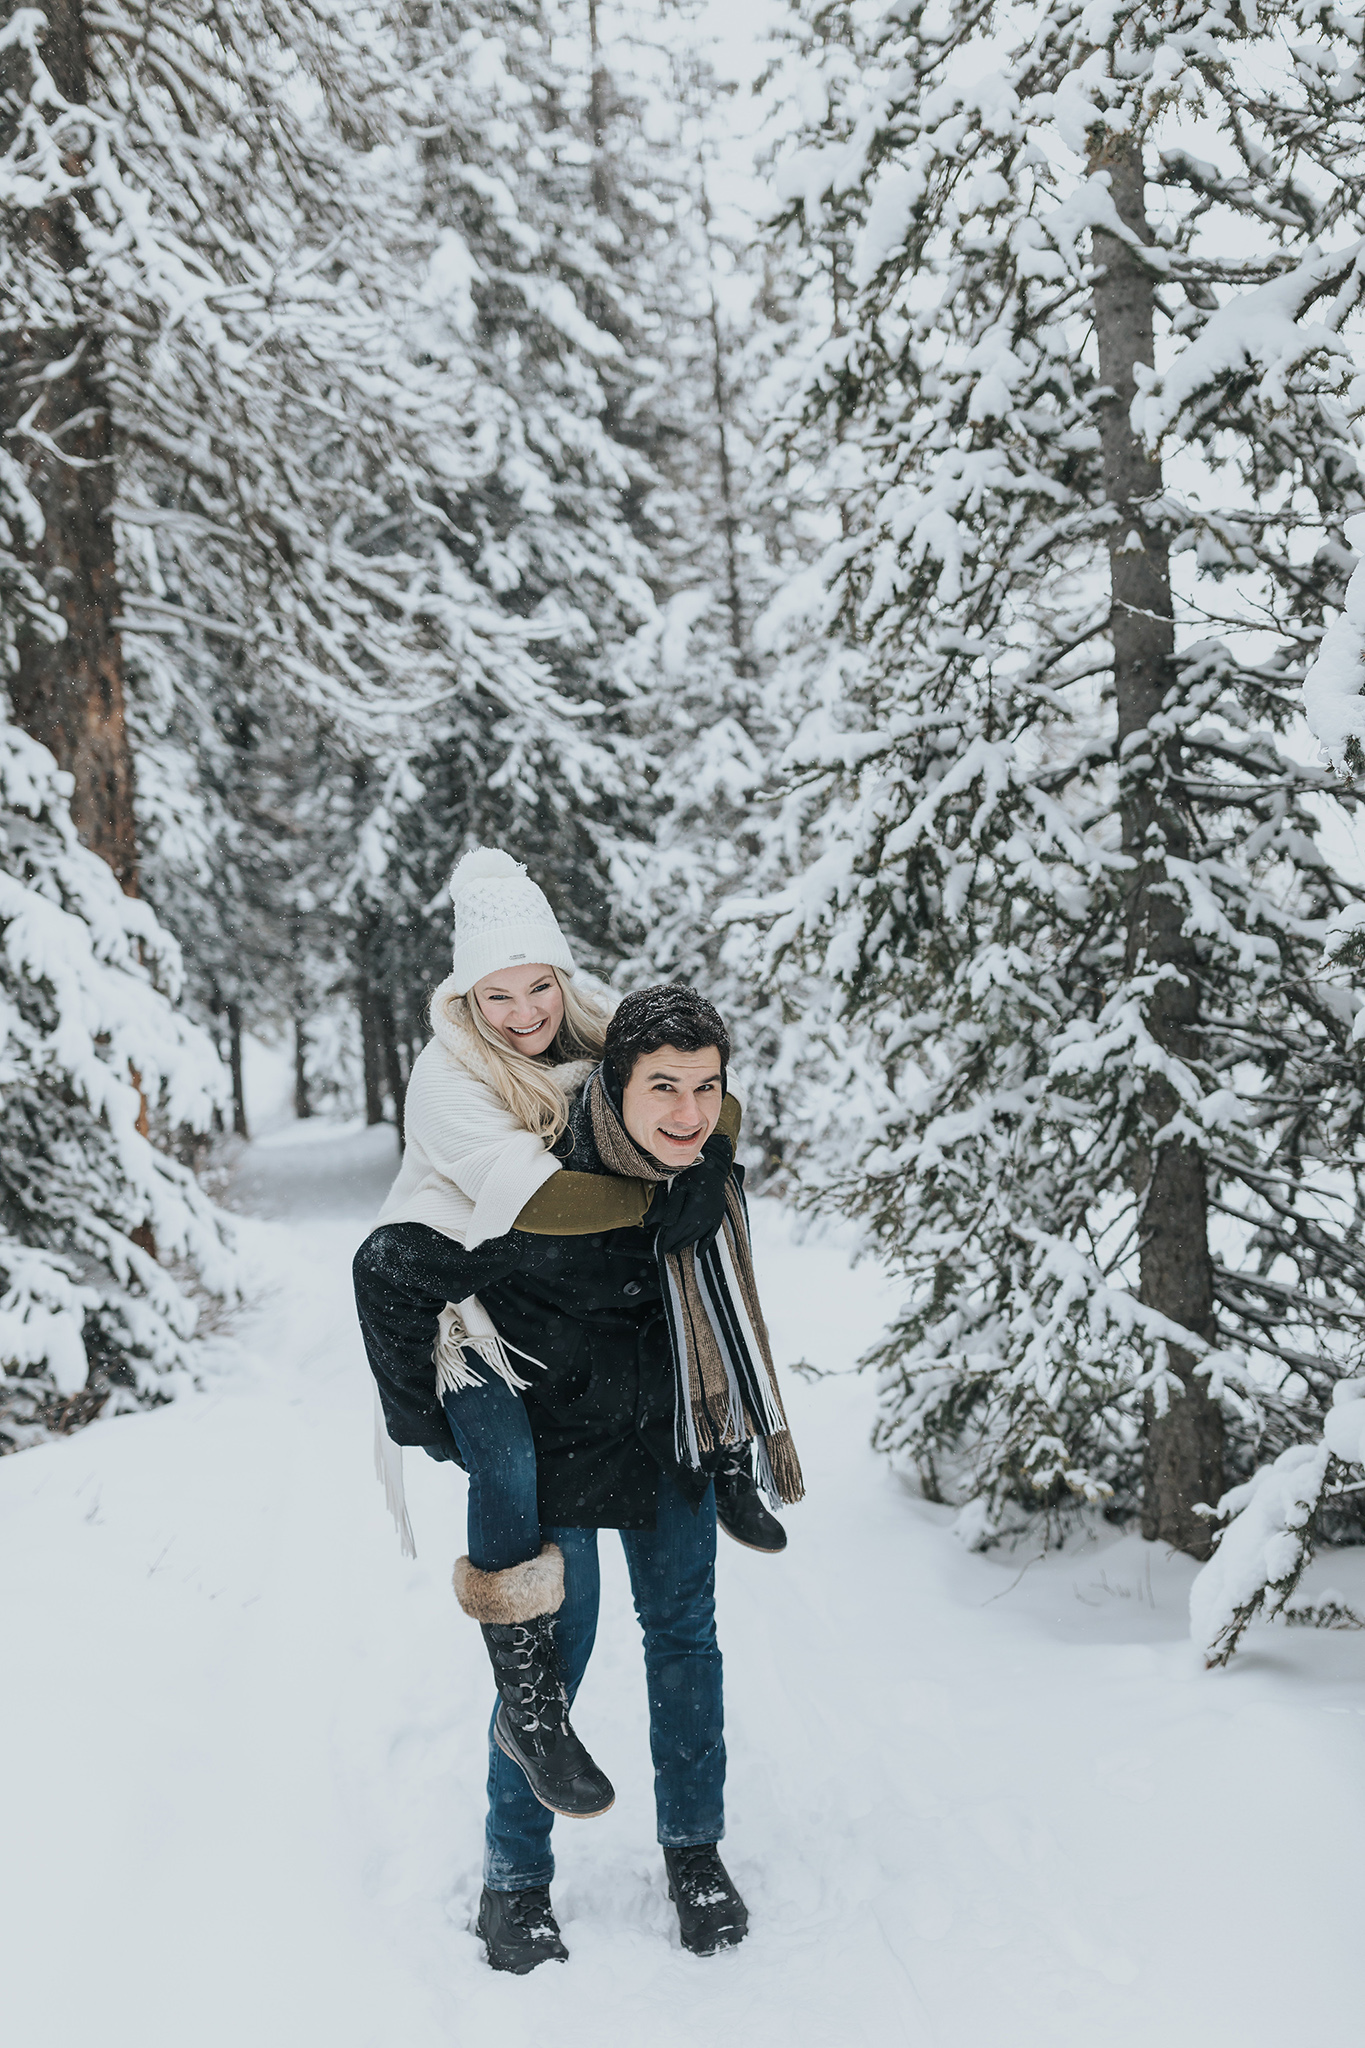 playful Lake Louise winter couples anniversary photos in the Canadian Rocky Mountains